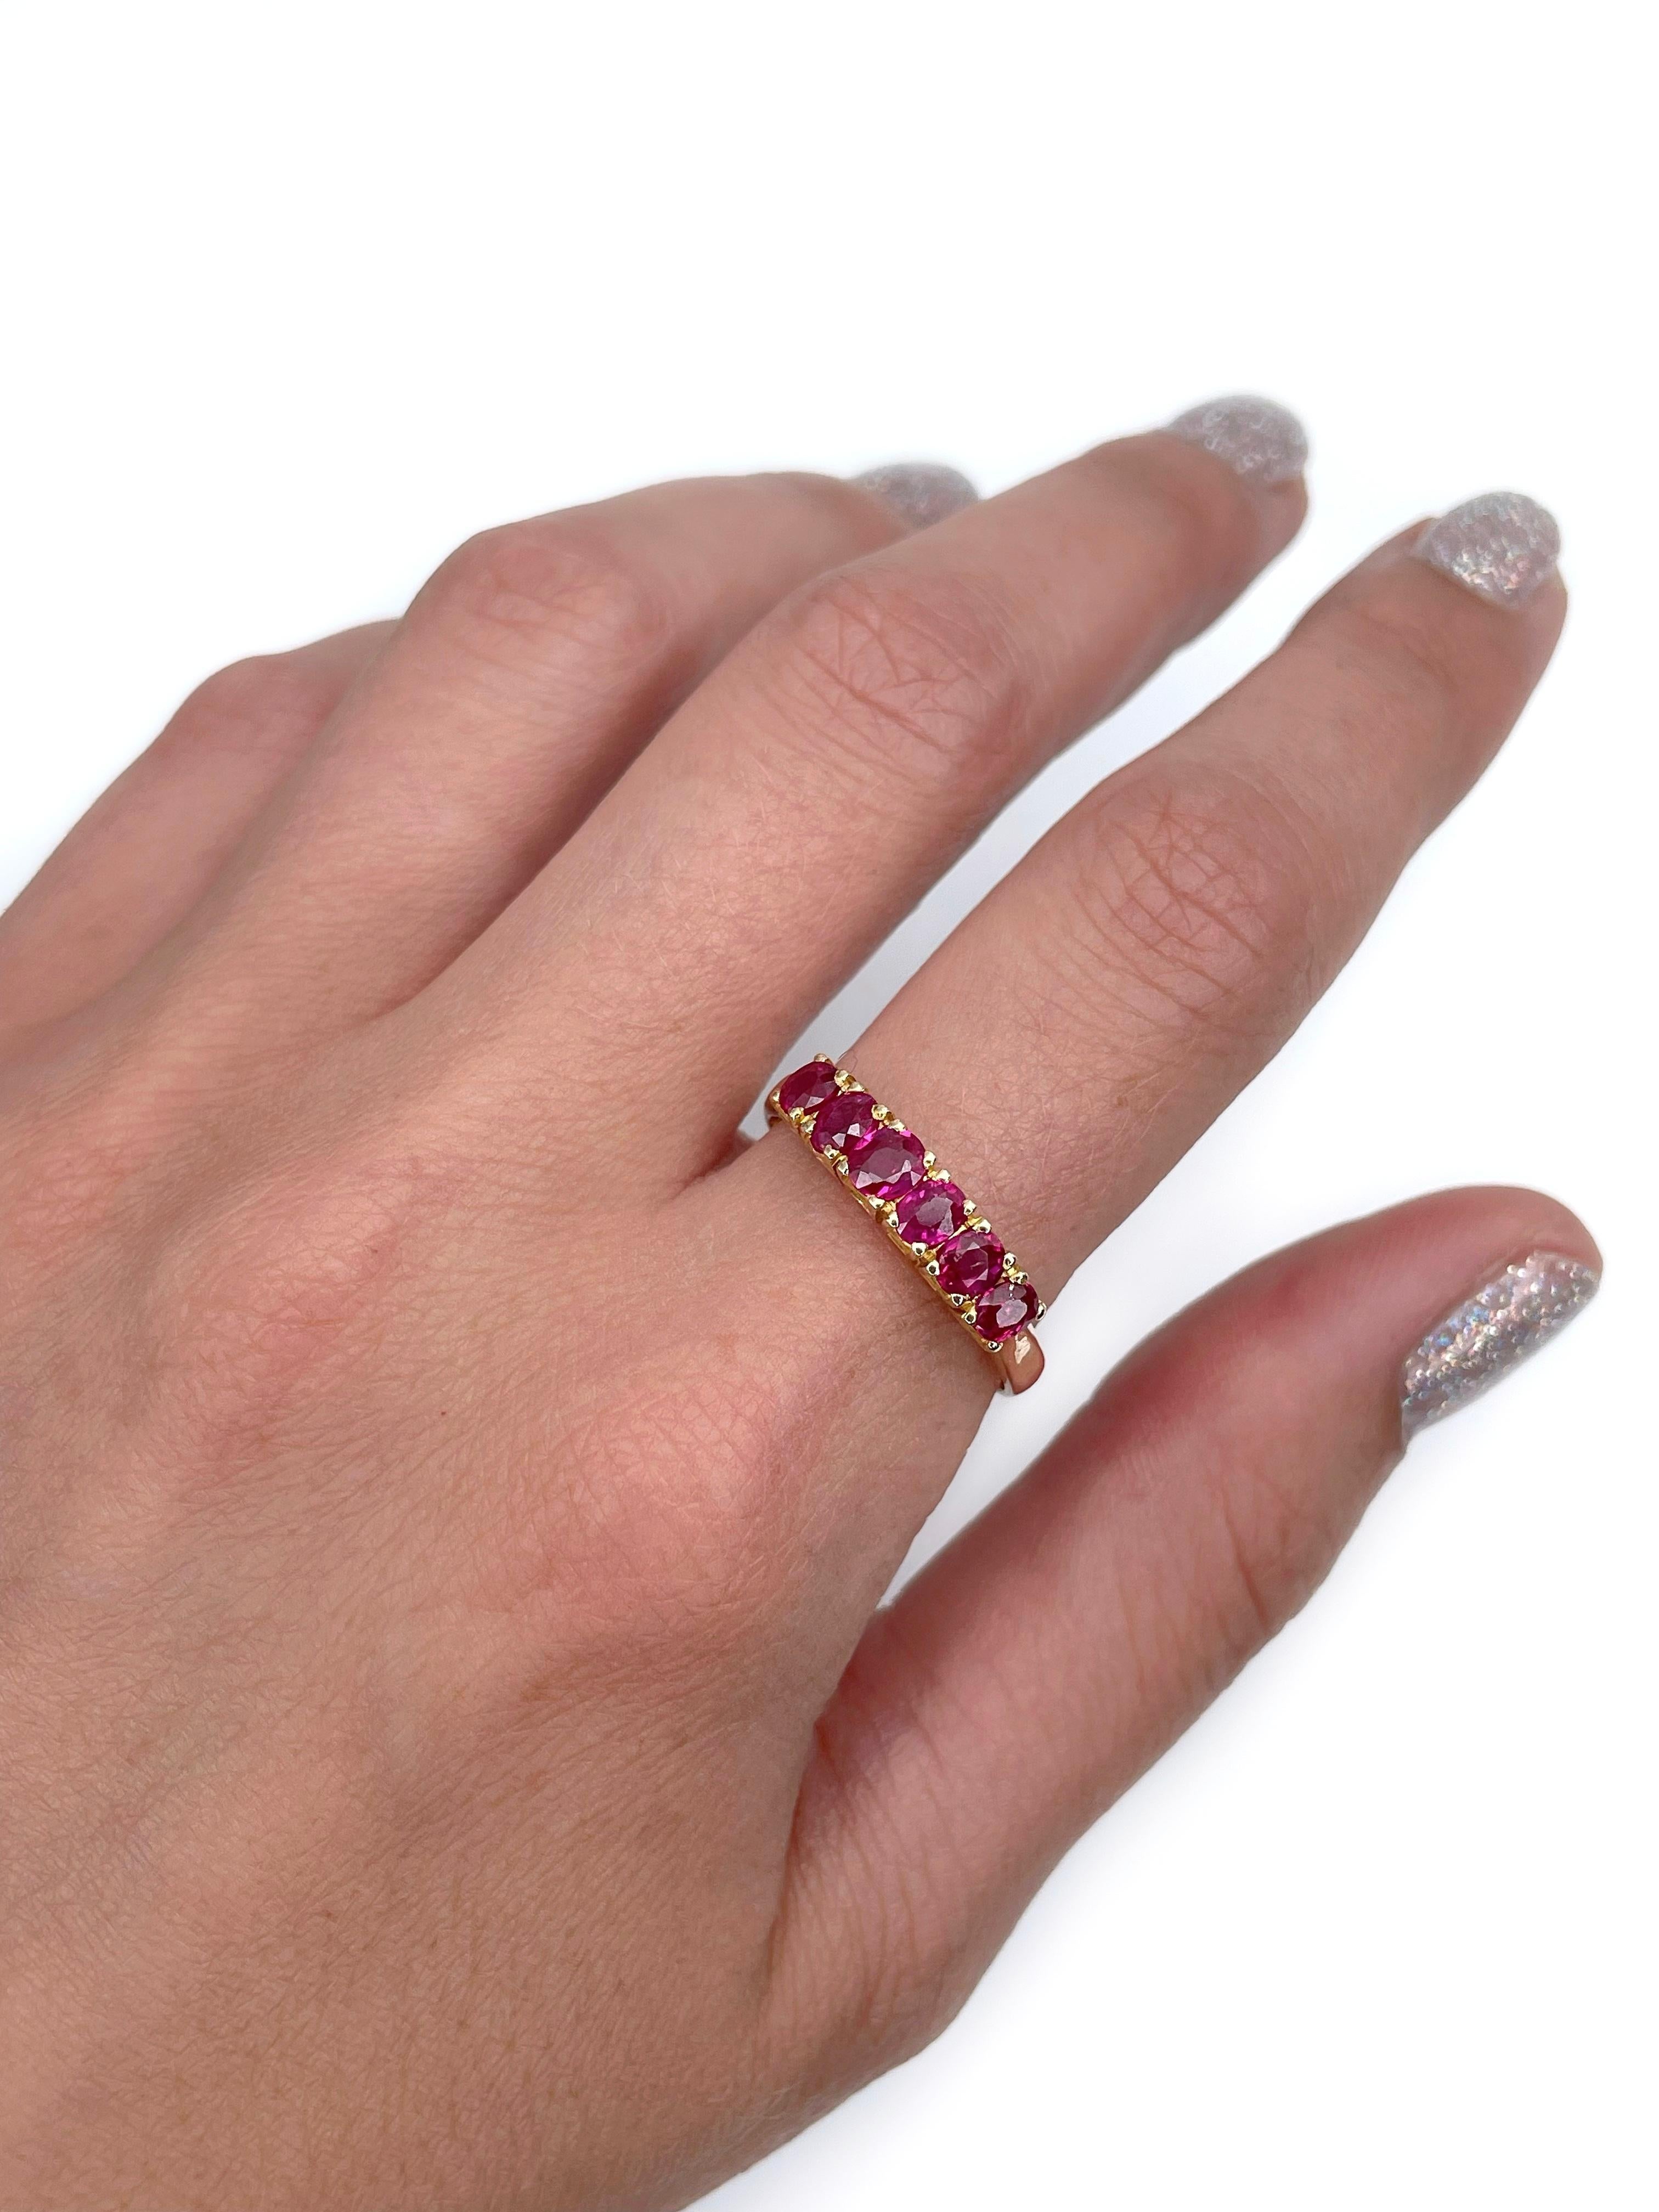 This is a lovely vintage band ring crafted in 18K yellow gold. The piece features 6 oval cut rubies: TW 1.00ct, slpR 6/5, SI. 

Weight: 3.50g
Size: 20.5 (US 10.75)

IMPORTANT: please ask about the possibility to resize before purchase. This process